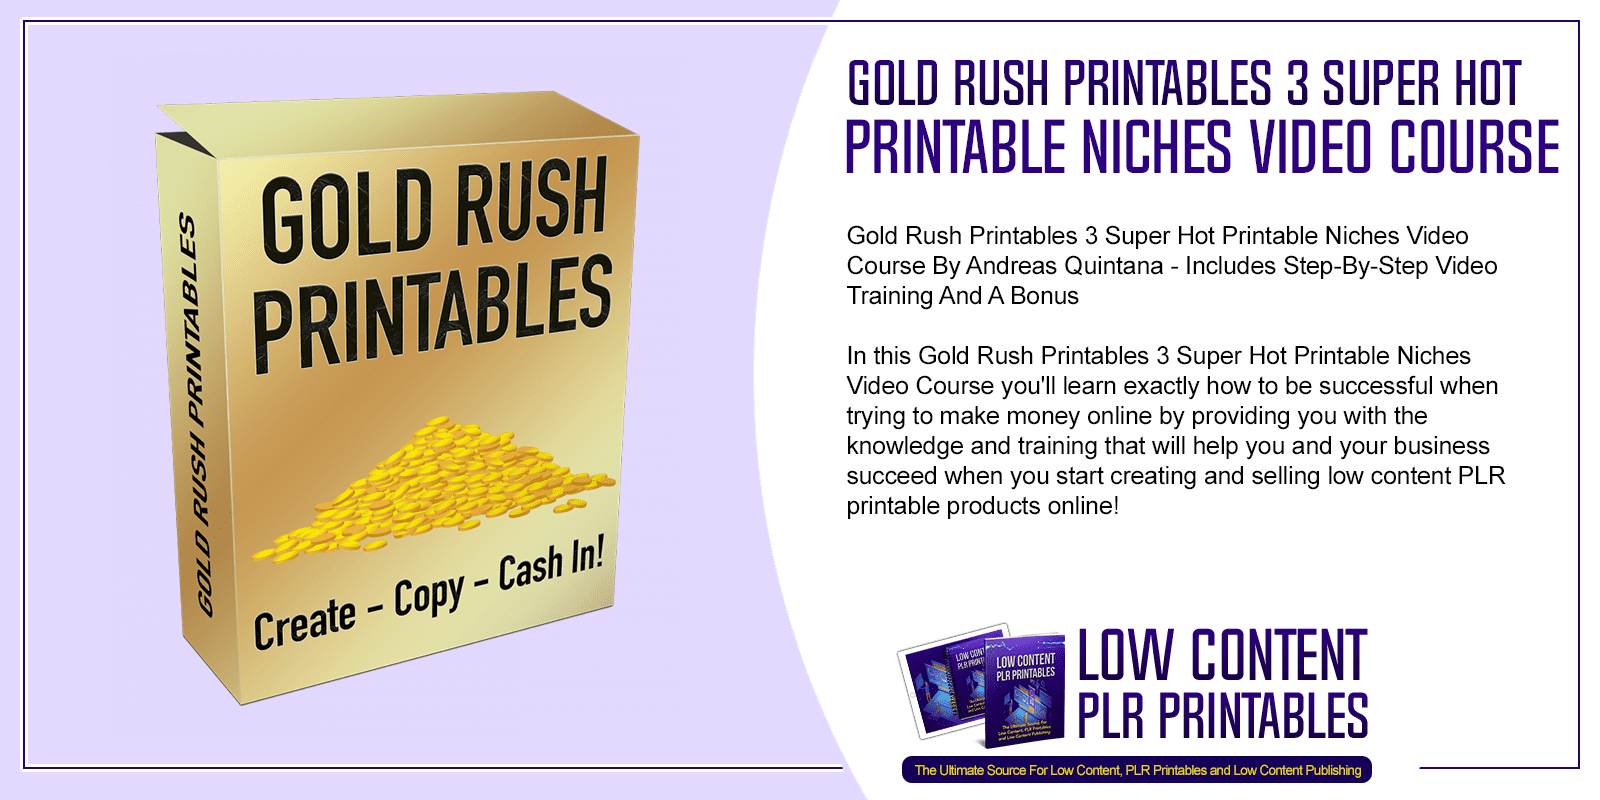 Gold Rush Printables 3 Super Hot Printable Niches Video Course A